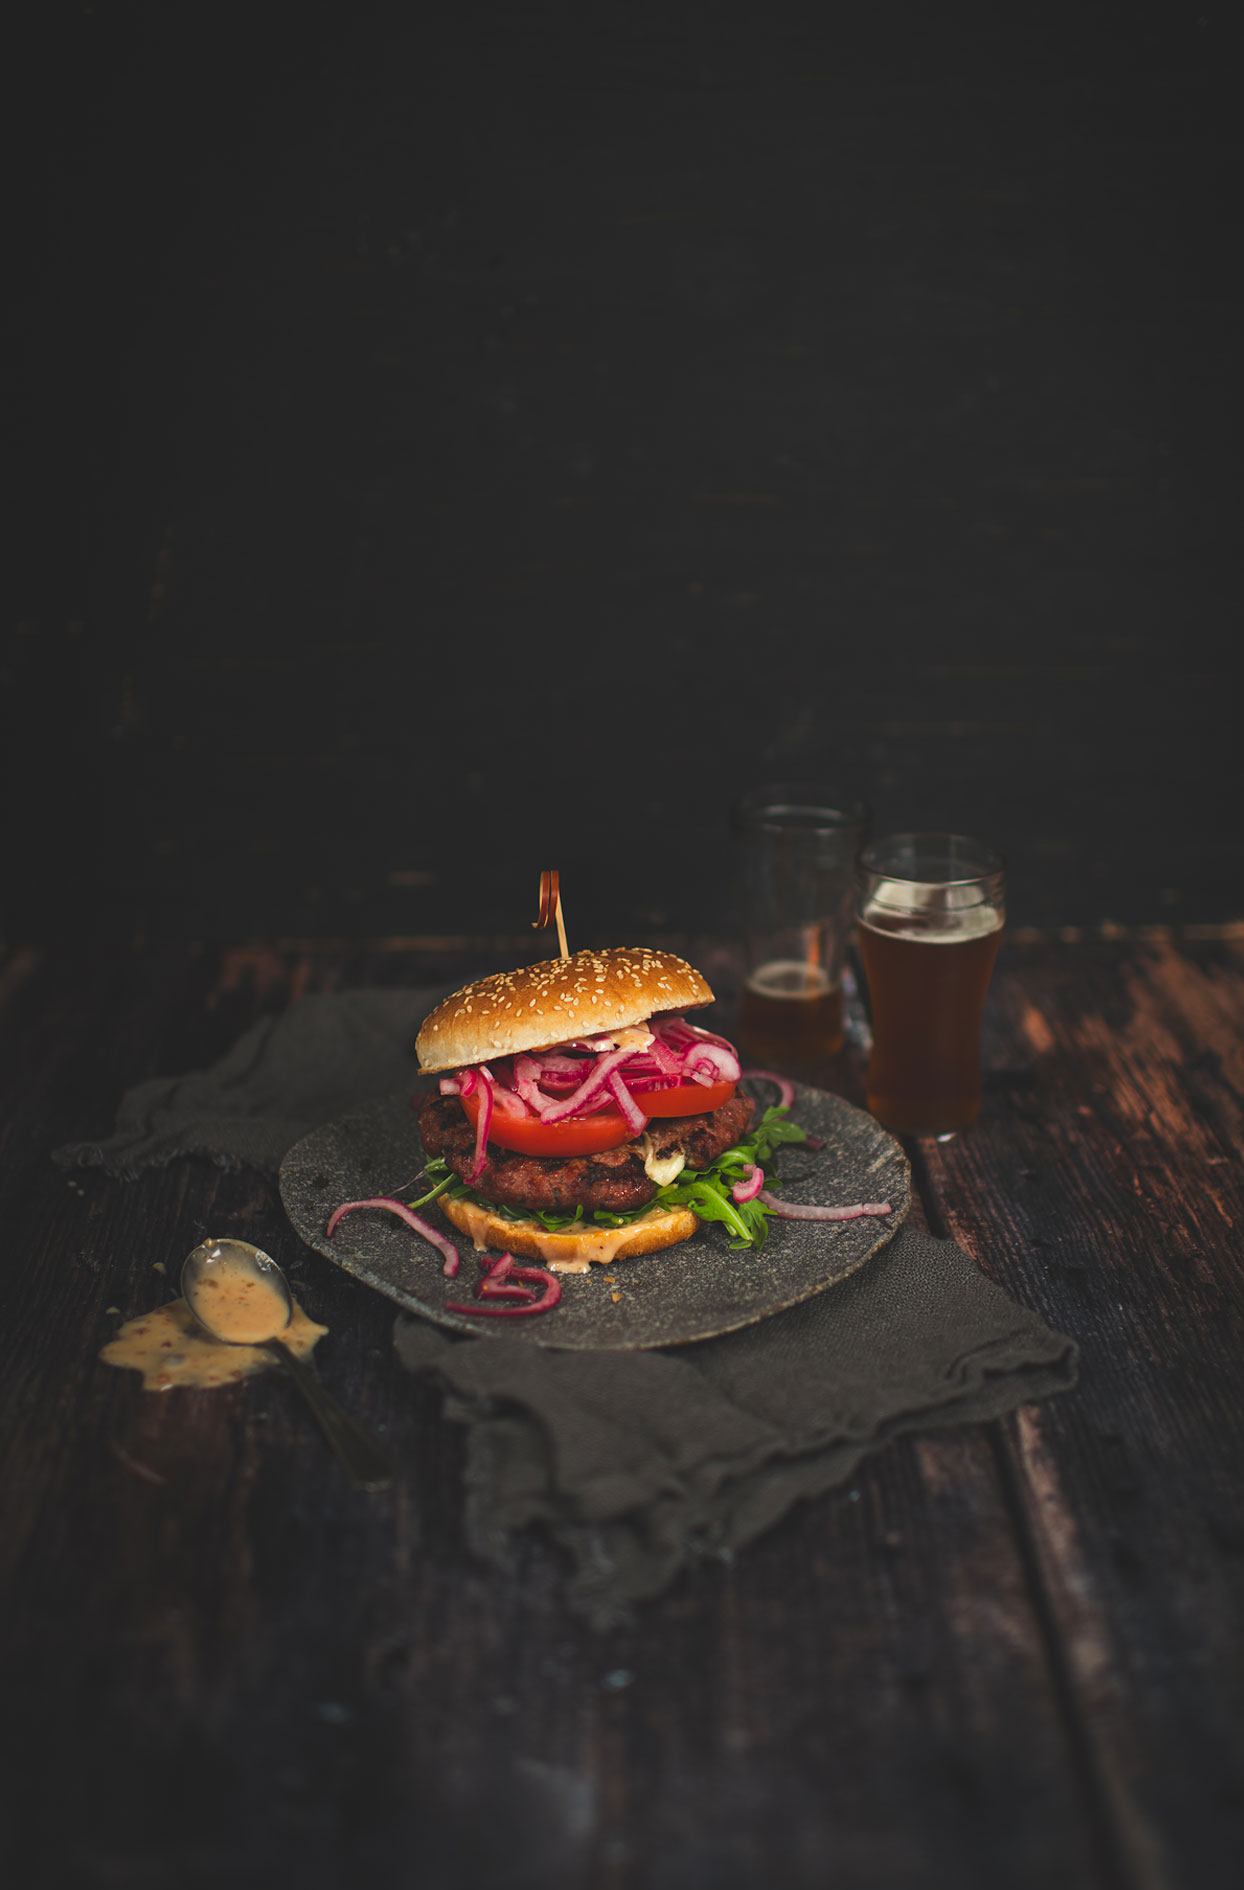 Hamburgers with cheese curds, bacon and blond beer